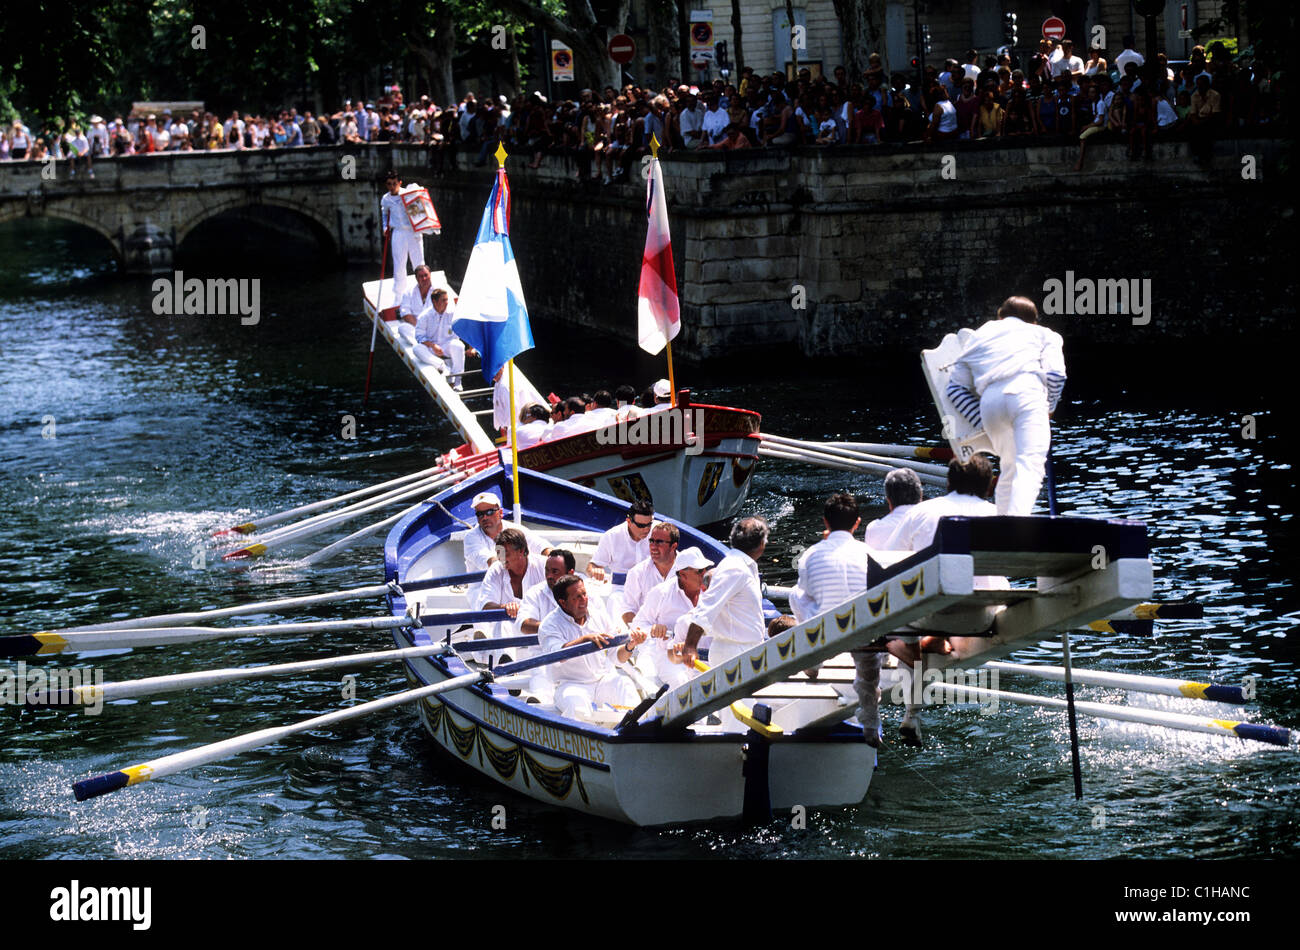 France, Gard, Nimes, water joust on canal de la fontaine during the feria (annual festival of Nimes) Stock Photo